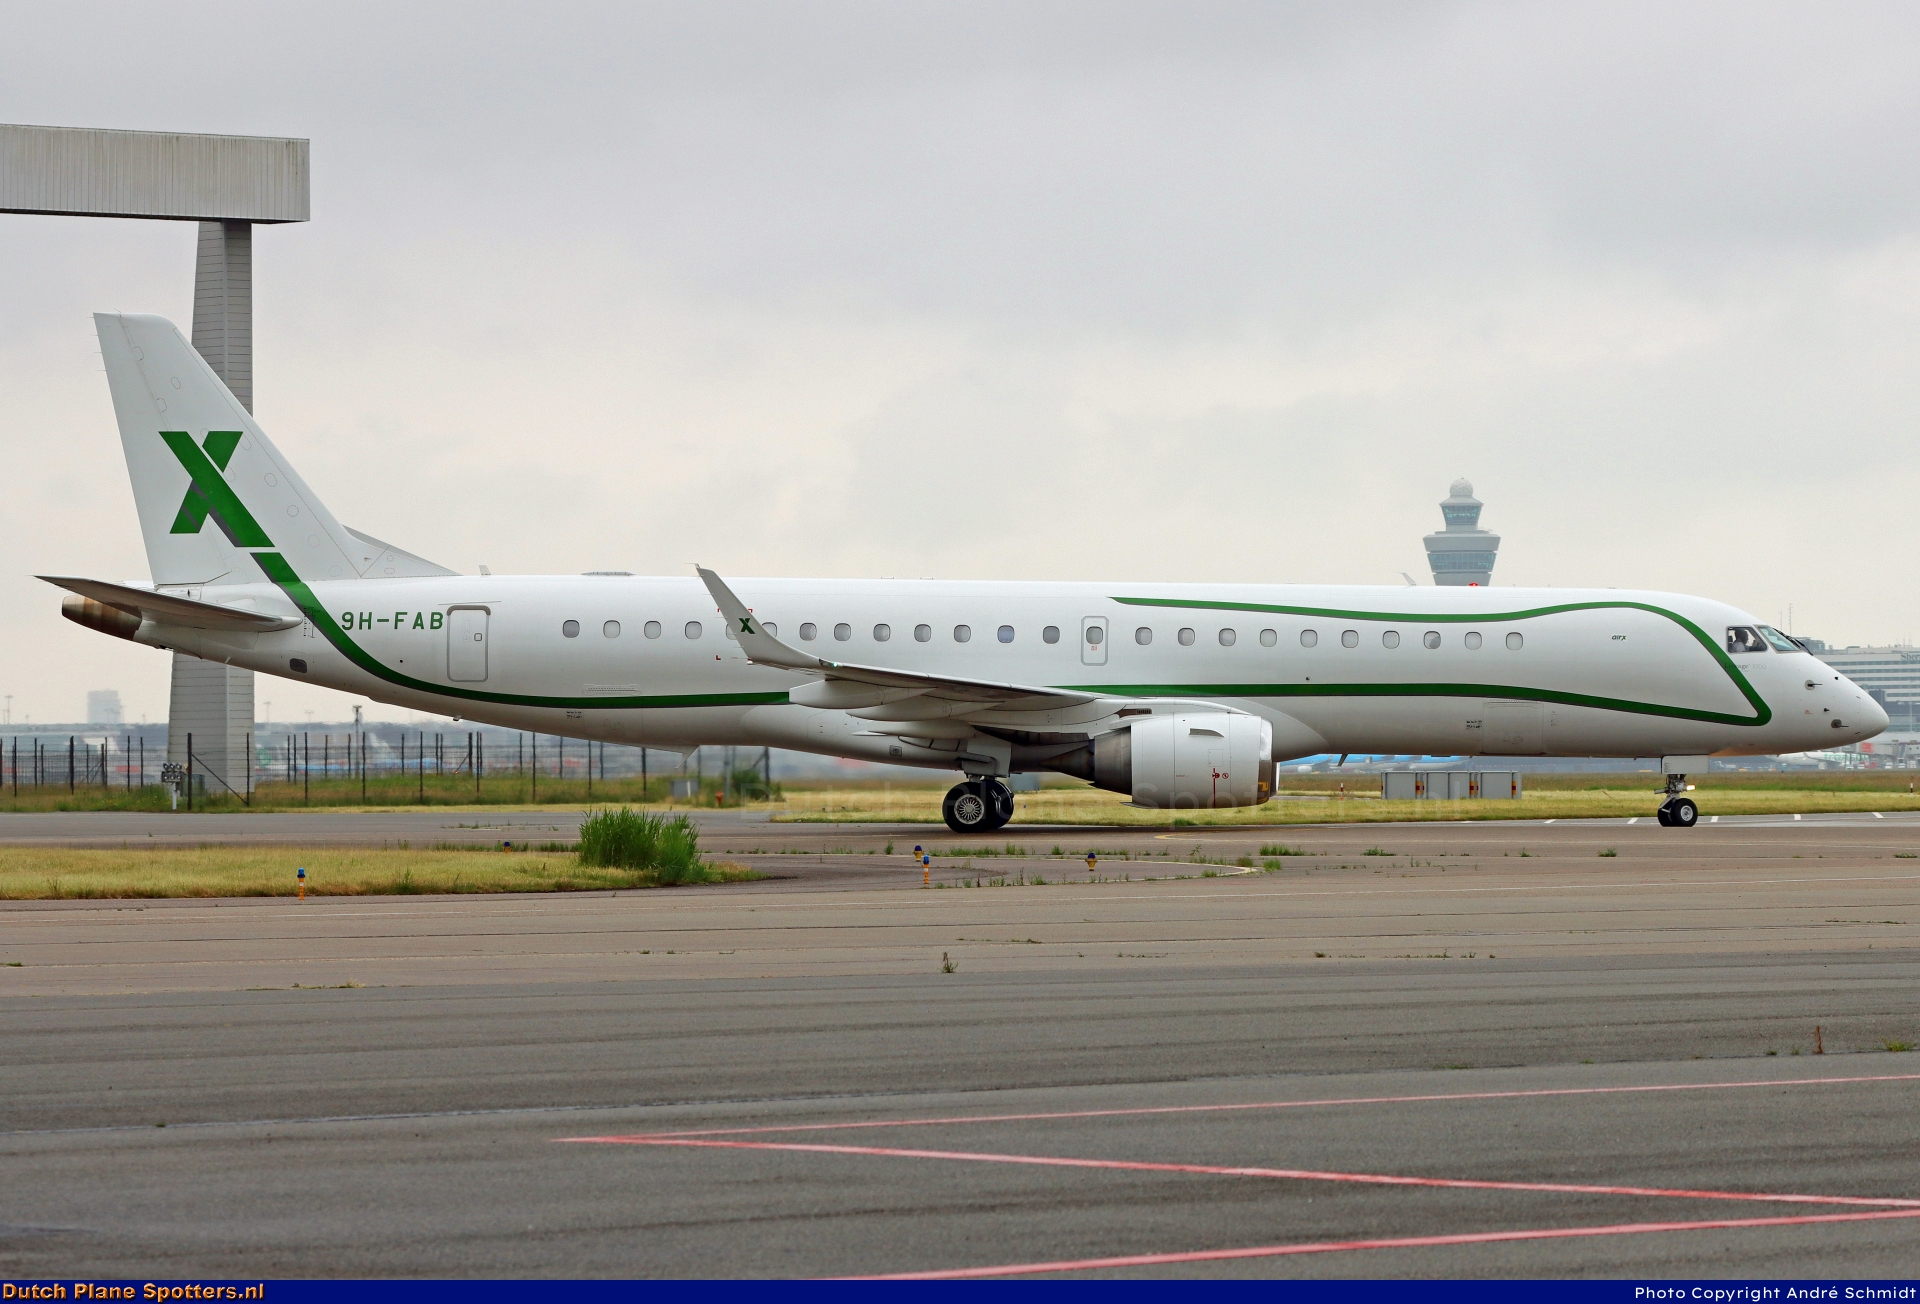 9H-FAB Embraer 190 (Lineage 1000) Air X Charter by André Schmidt